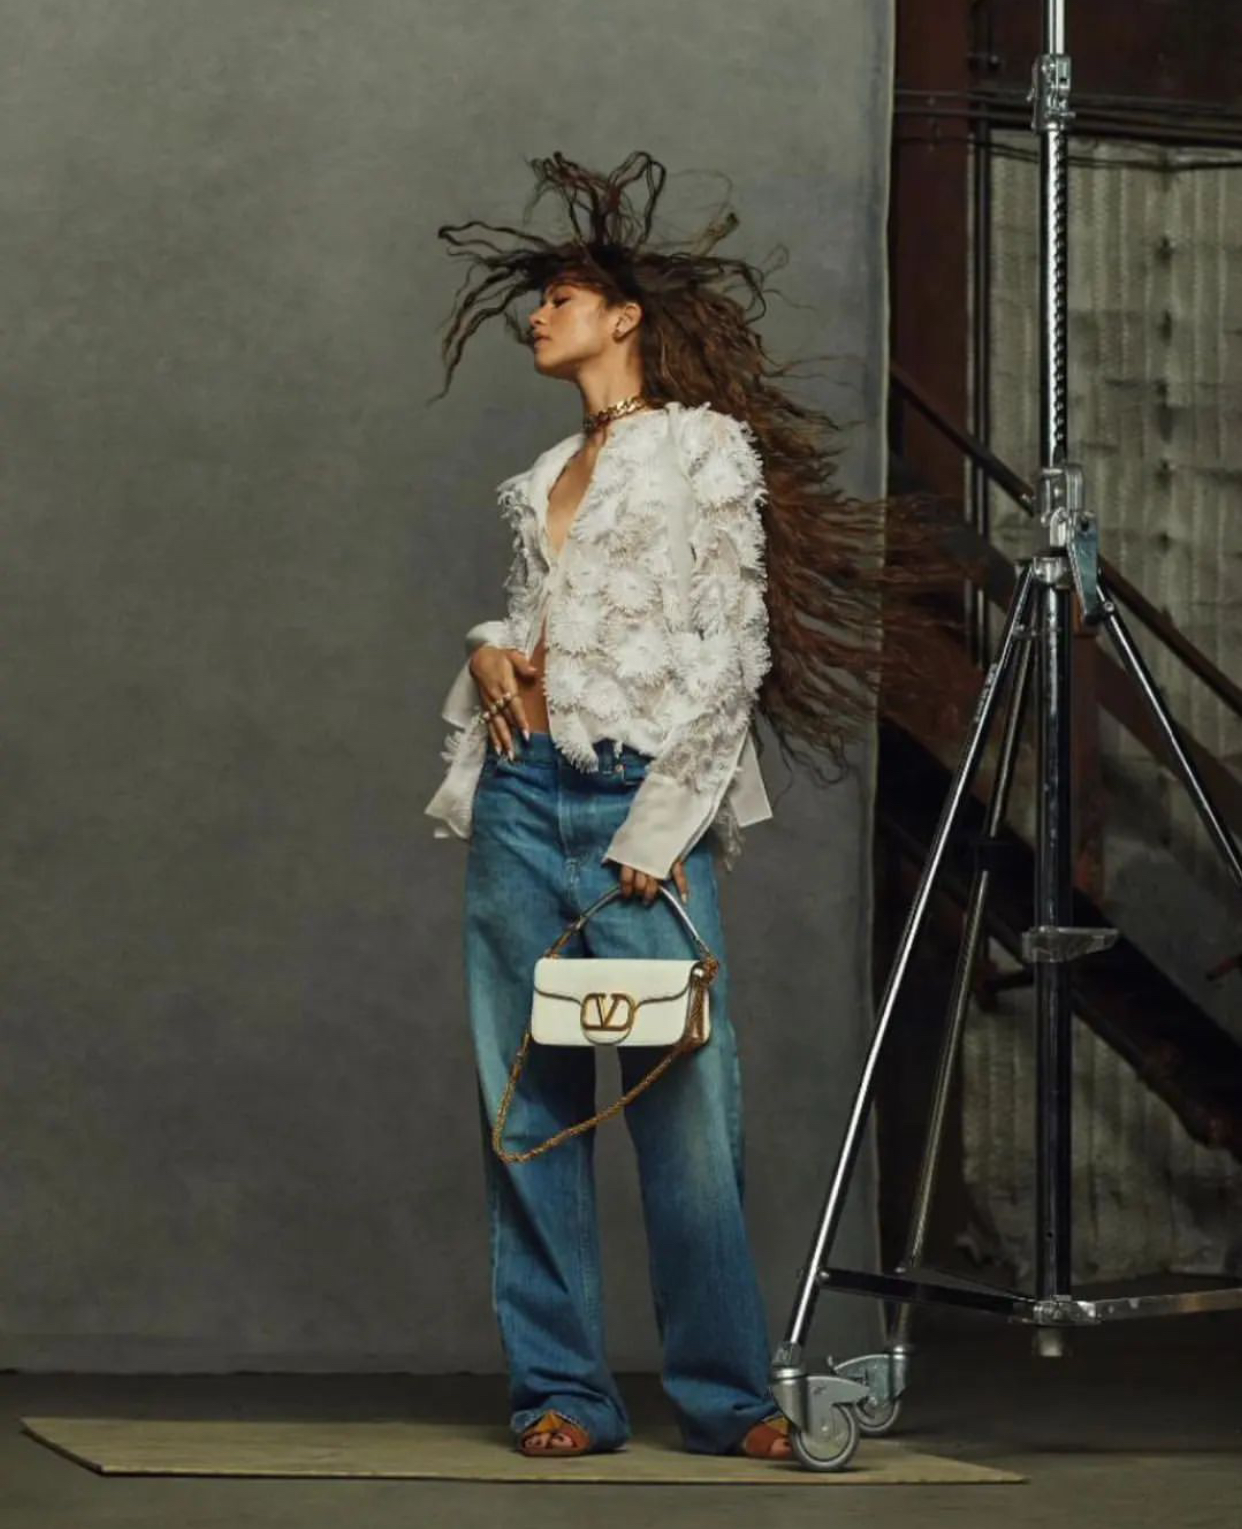 Zendaya the Face of Valentino's new Campaign Rendez-Vous